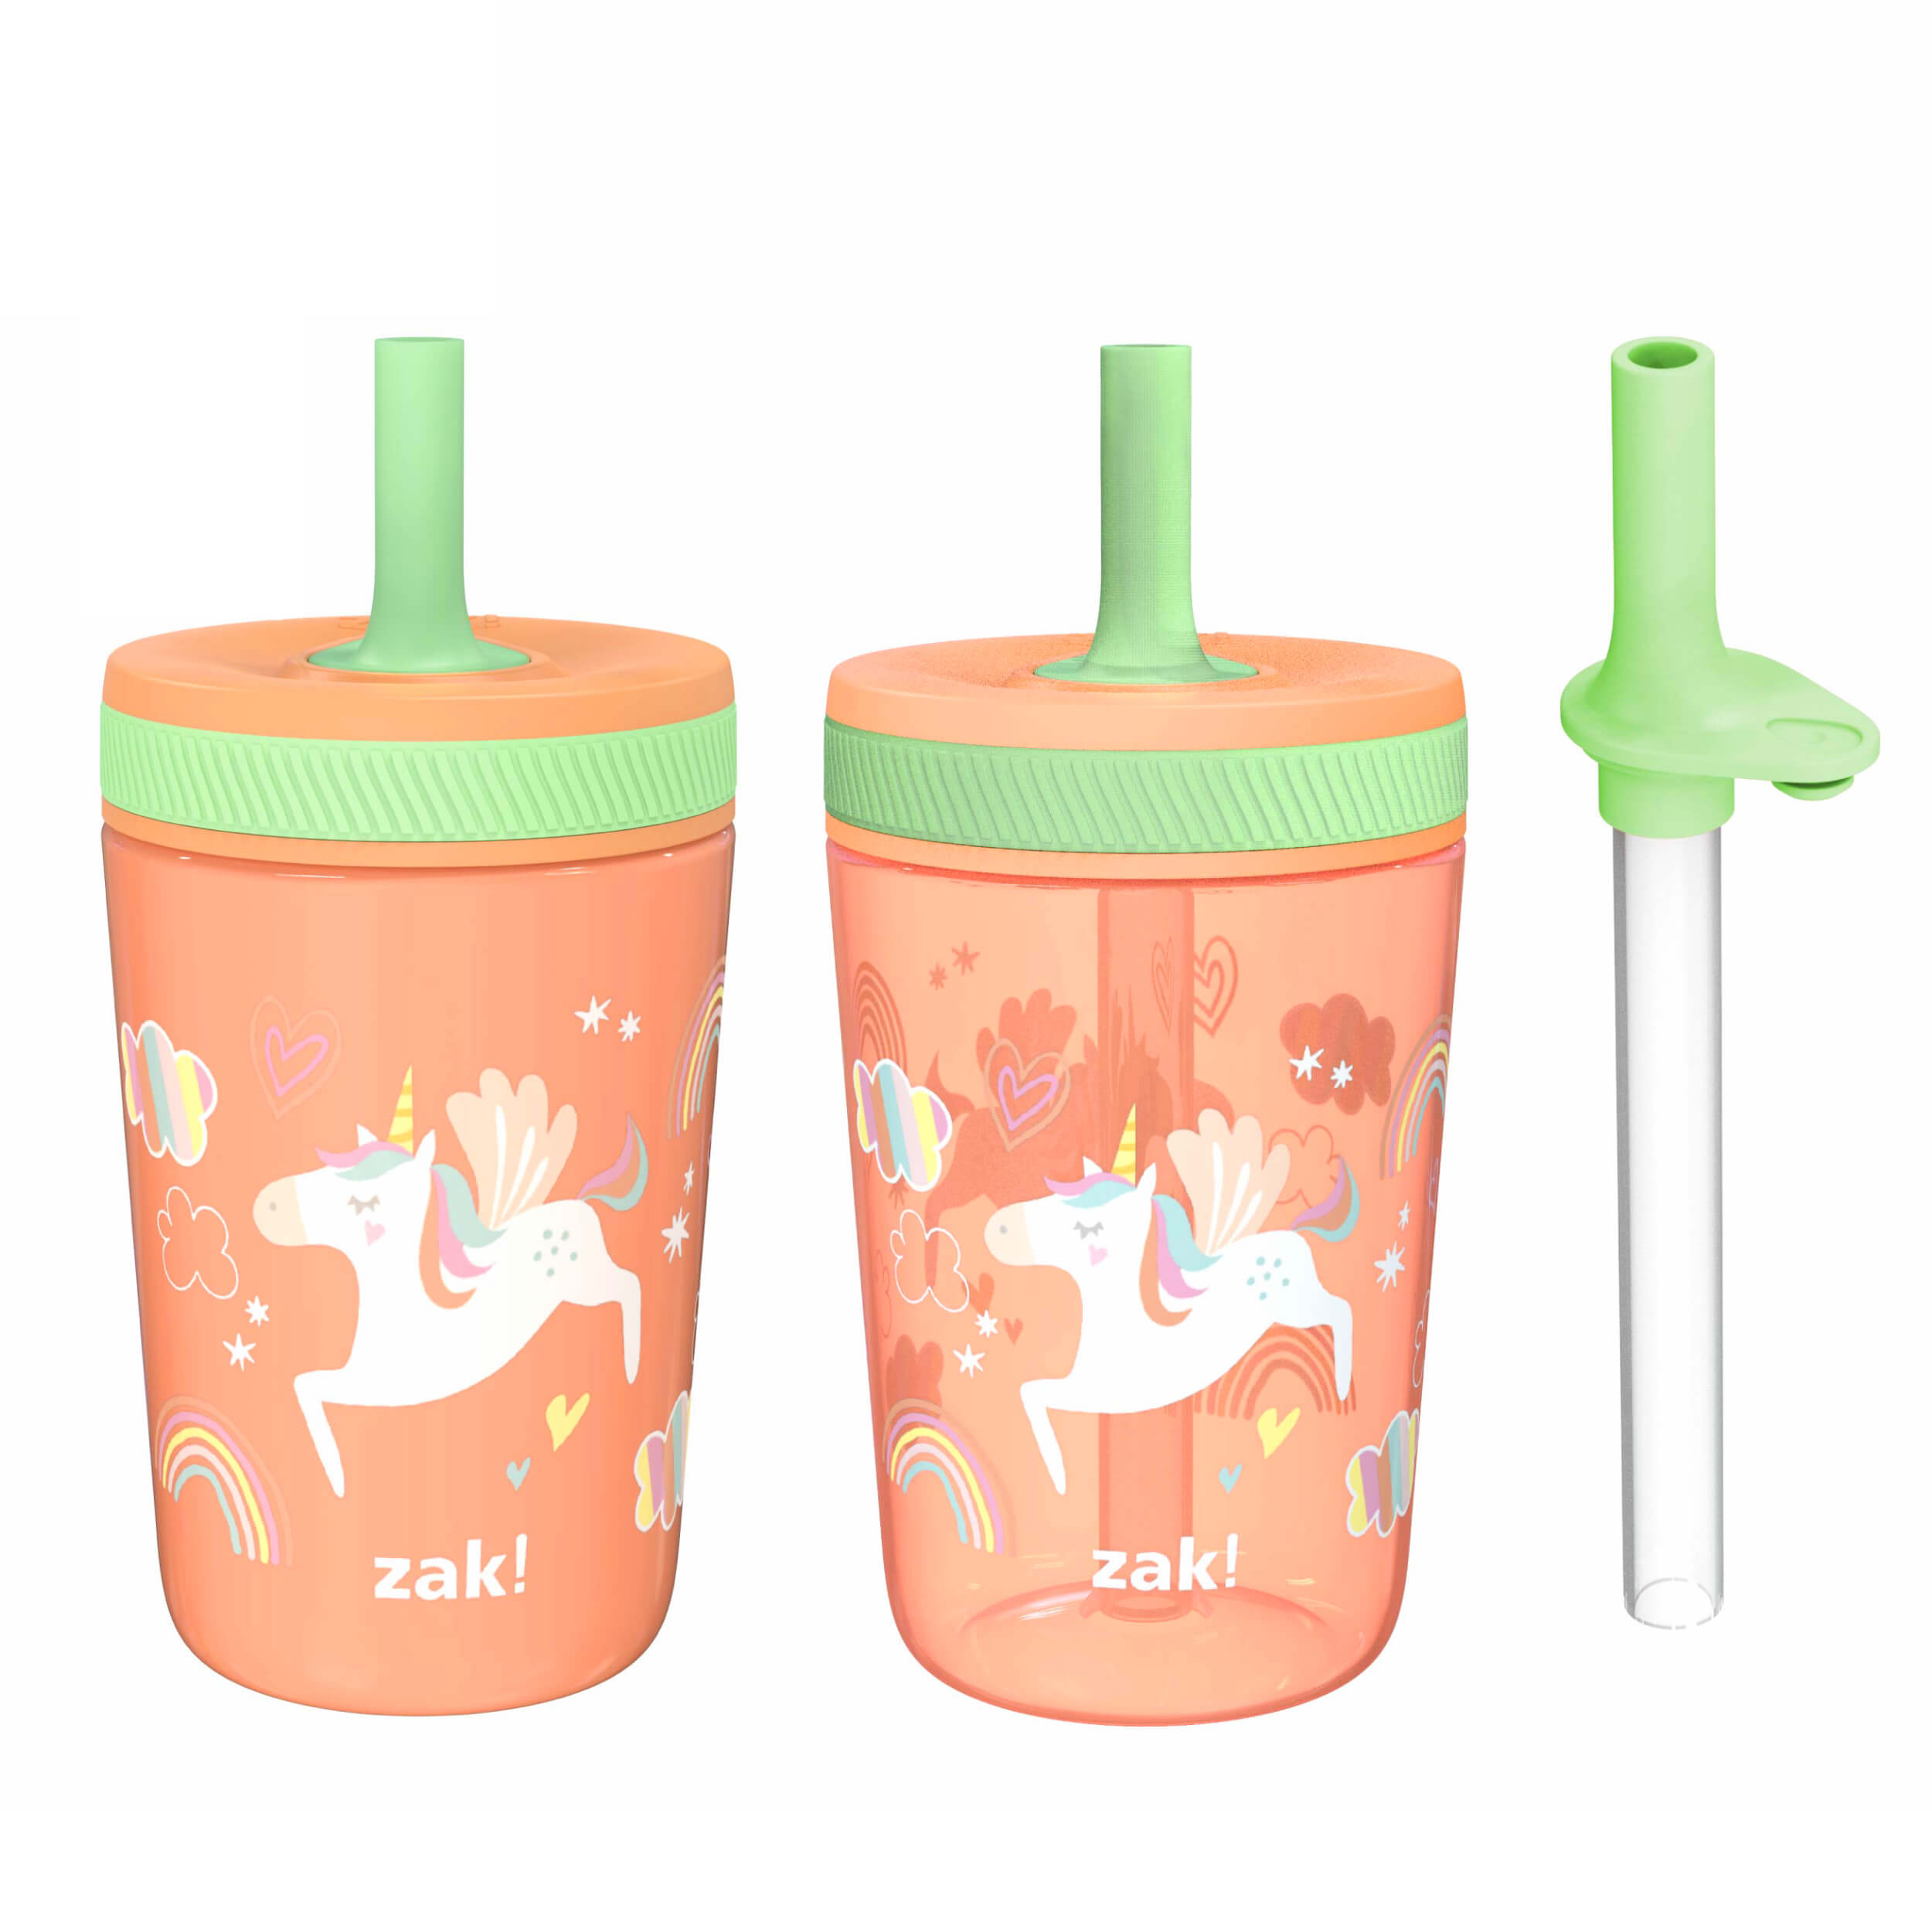 Zak Designs Kelso 15 oz Tumbler Set, (Shells) Non-BPA Leak-Proof Screw-On  Lid with Straw Made of Dur…See more Zak Designs Kelso 15 oz Tumbler Set